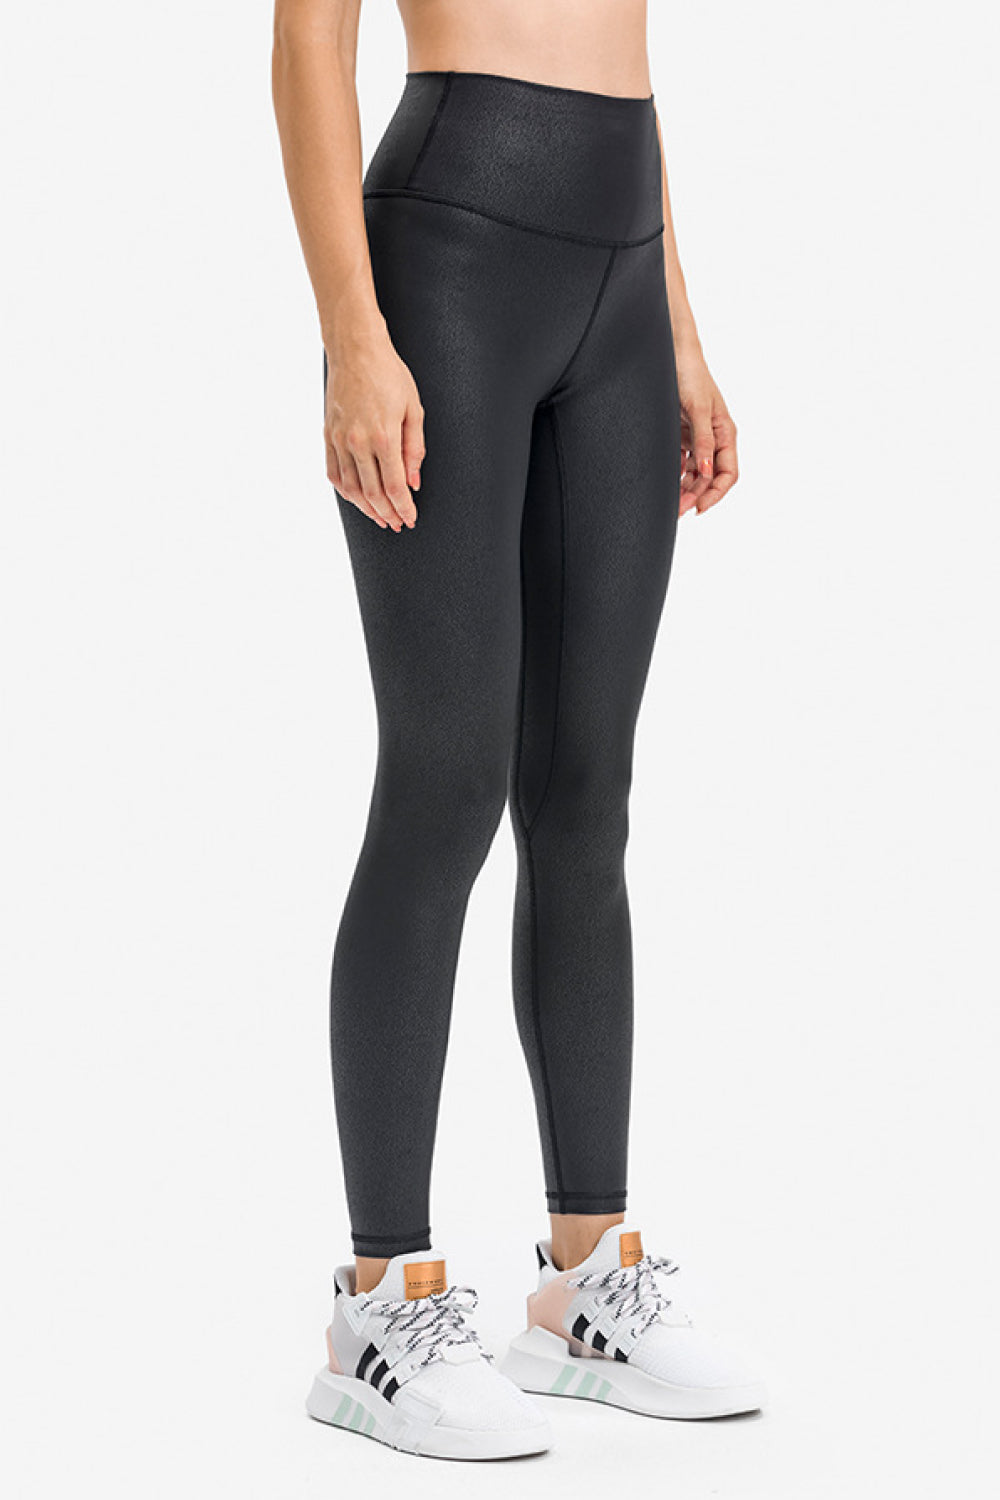 Invisible Pocket Sports Leggings Print on any thing USA/STOD clothes